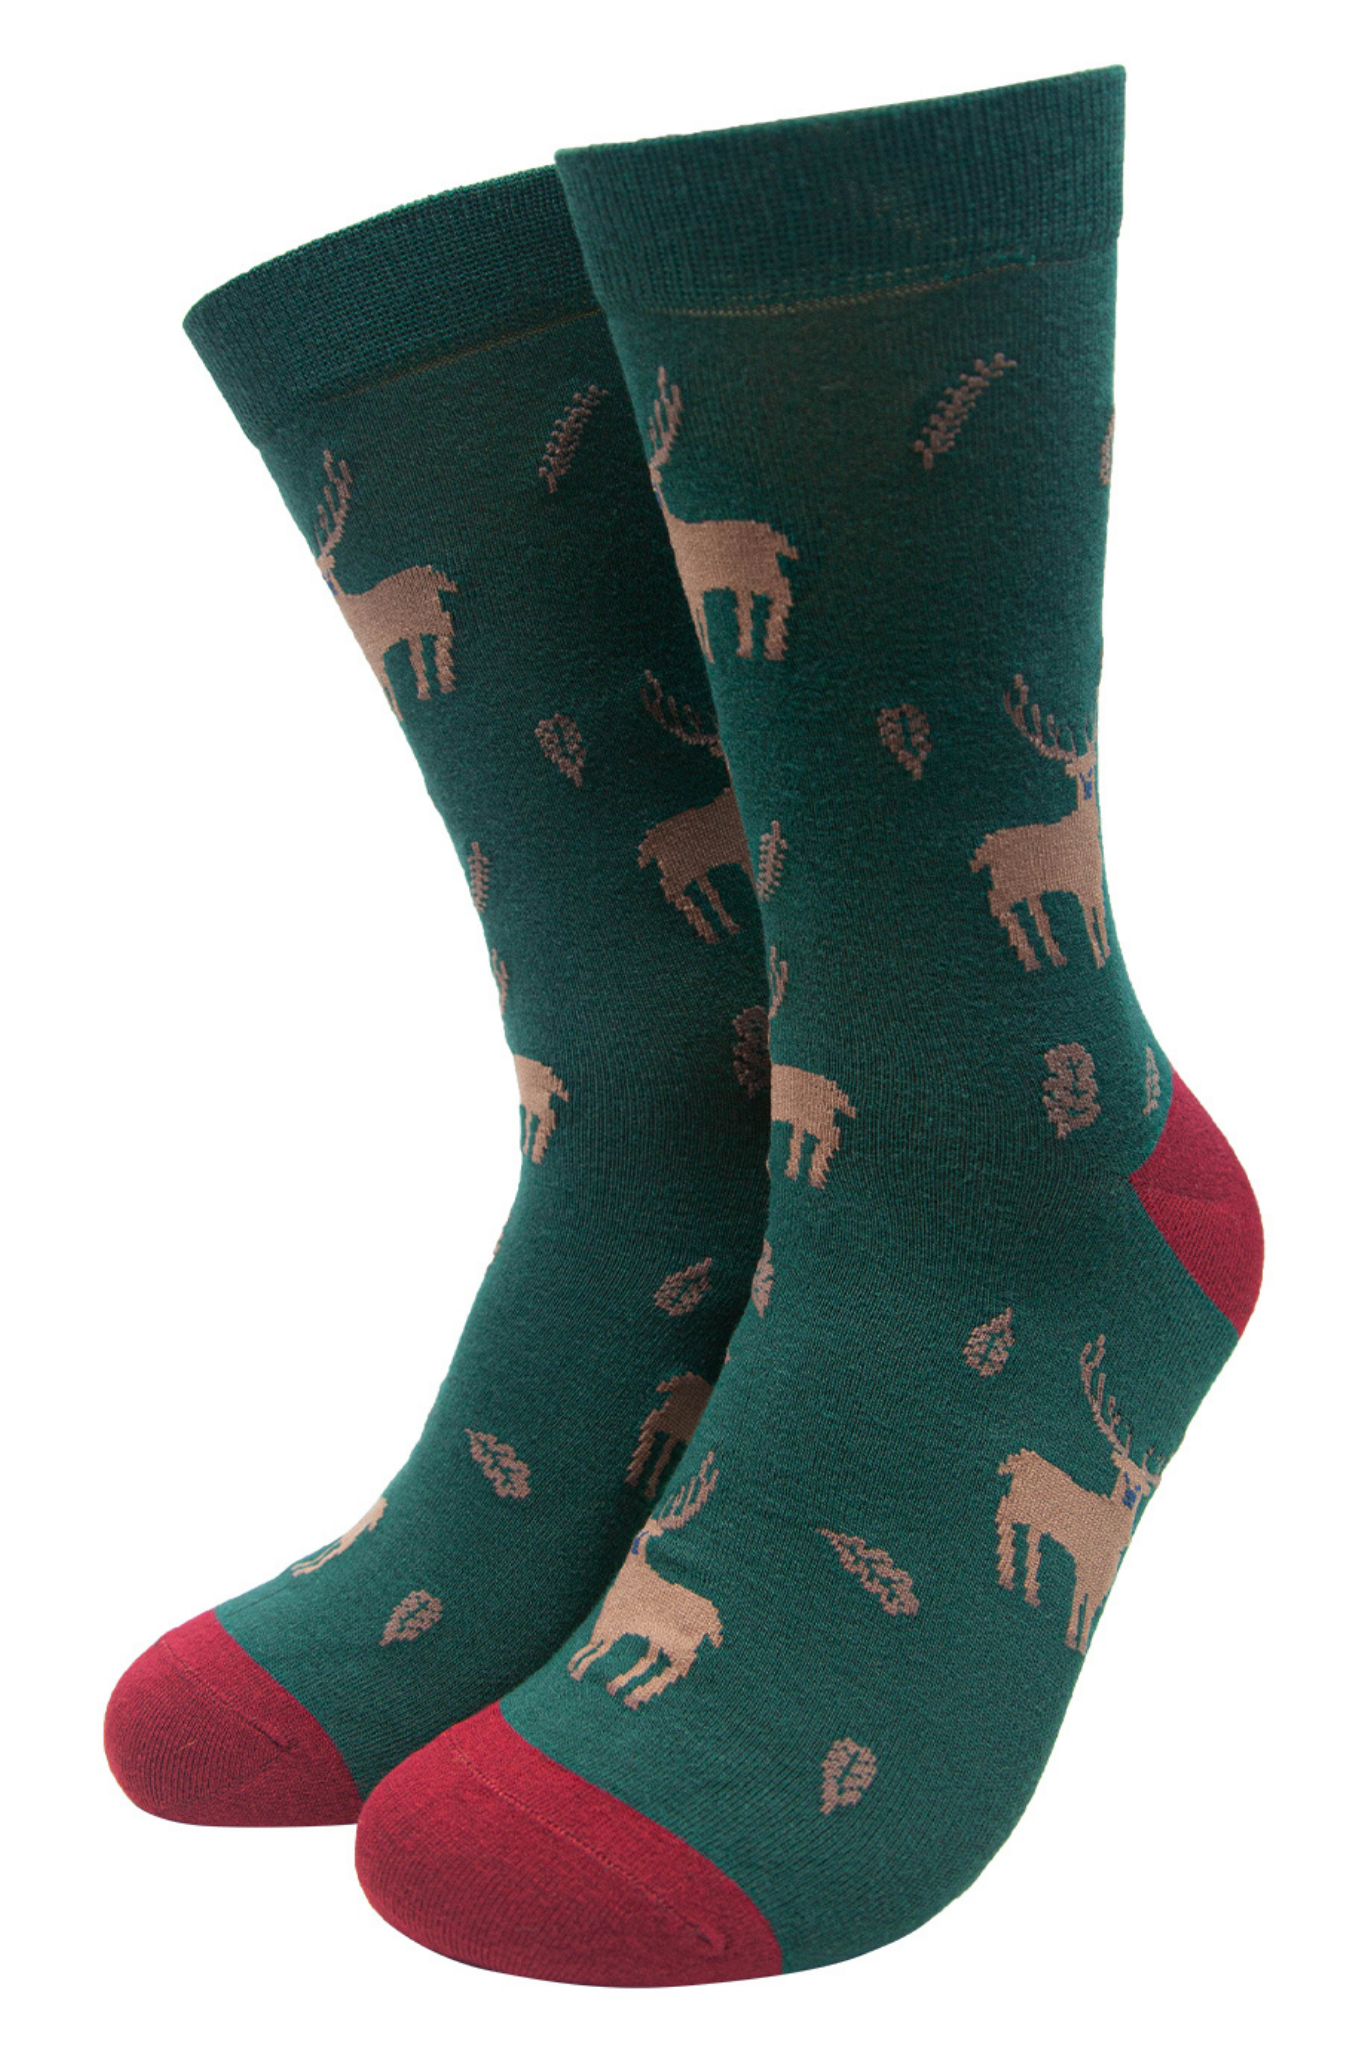 green dress socks with an all over stag and leaf pattern